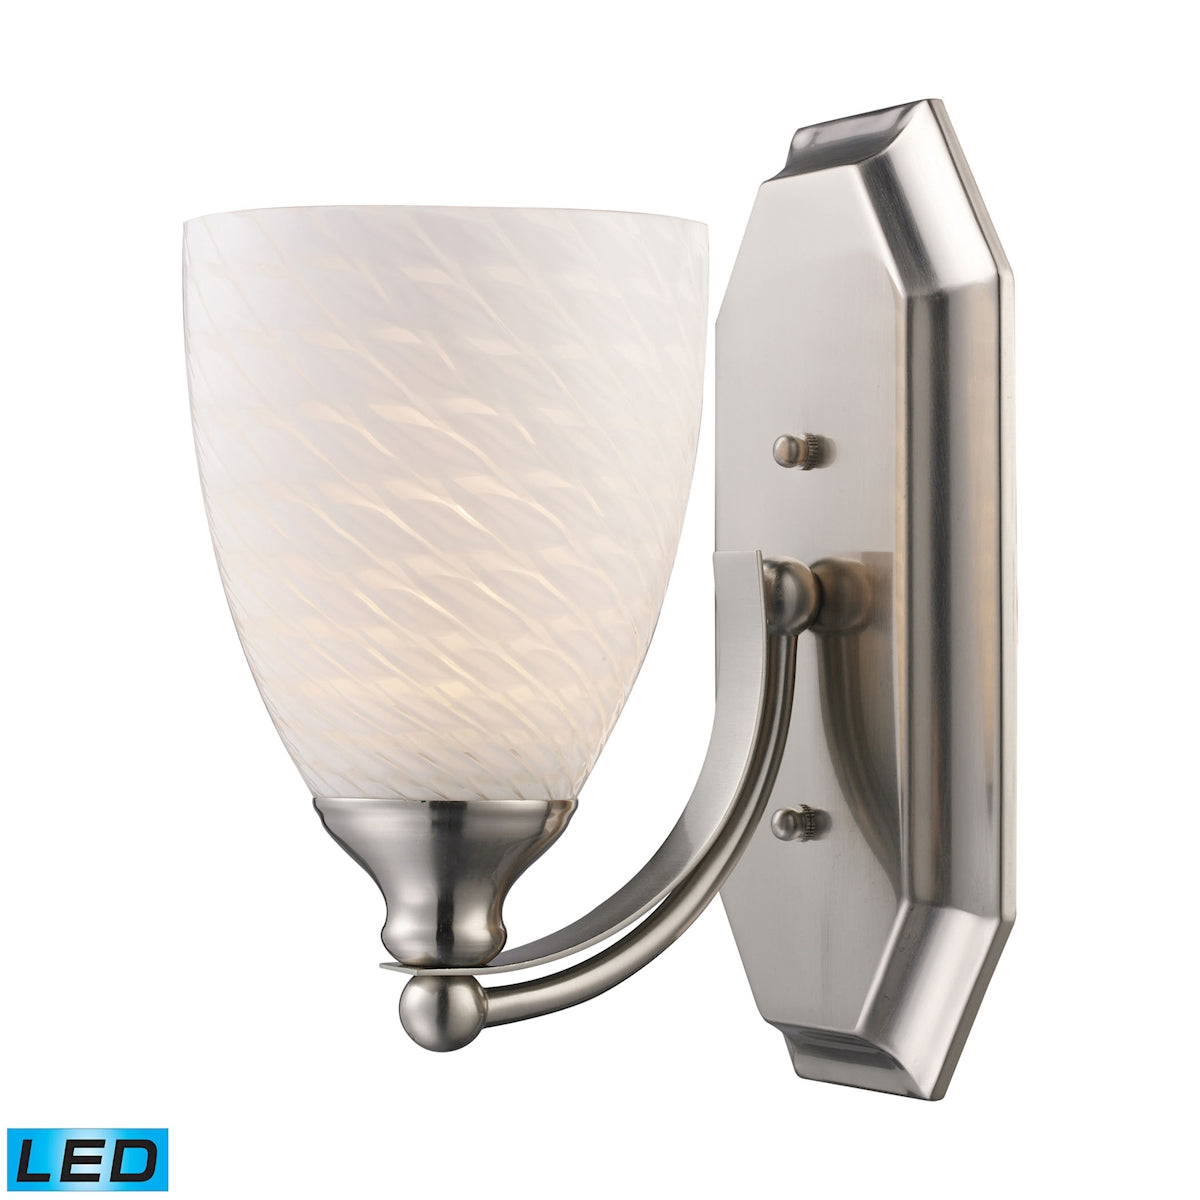 ELK Lighting 570-1N-WS-LED Mix-N-Match Vanity 1-Light Wall Lamp in Satin Nickel with White Swirl Glass - Includes LED Bulb